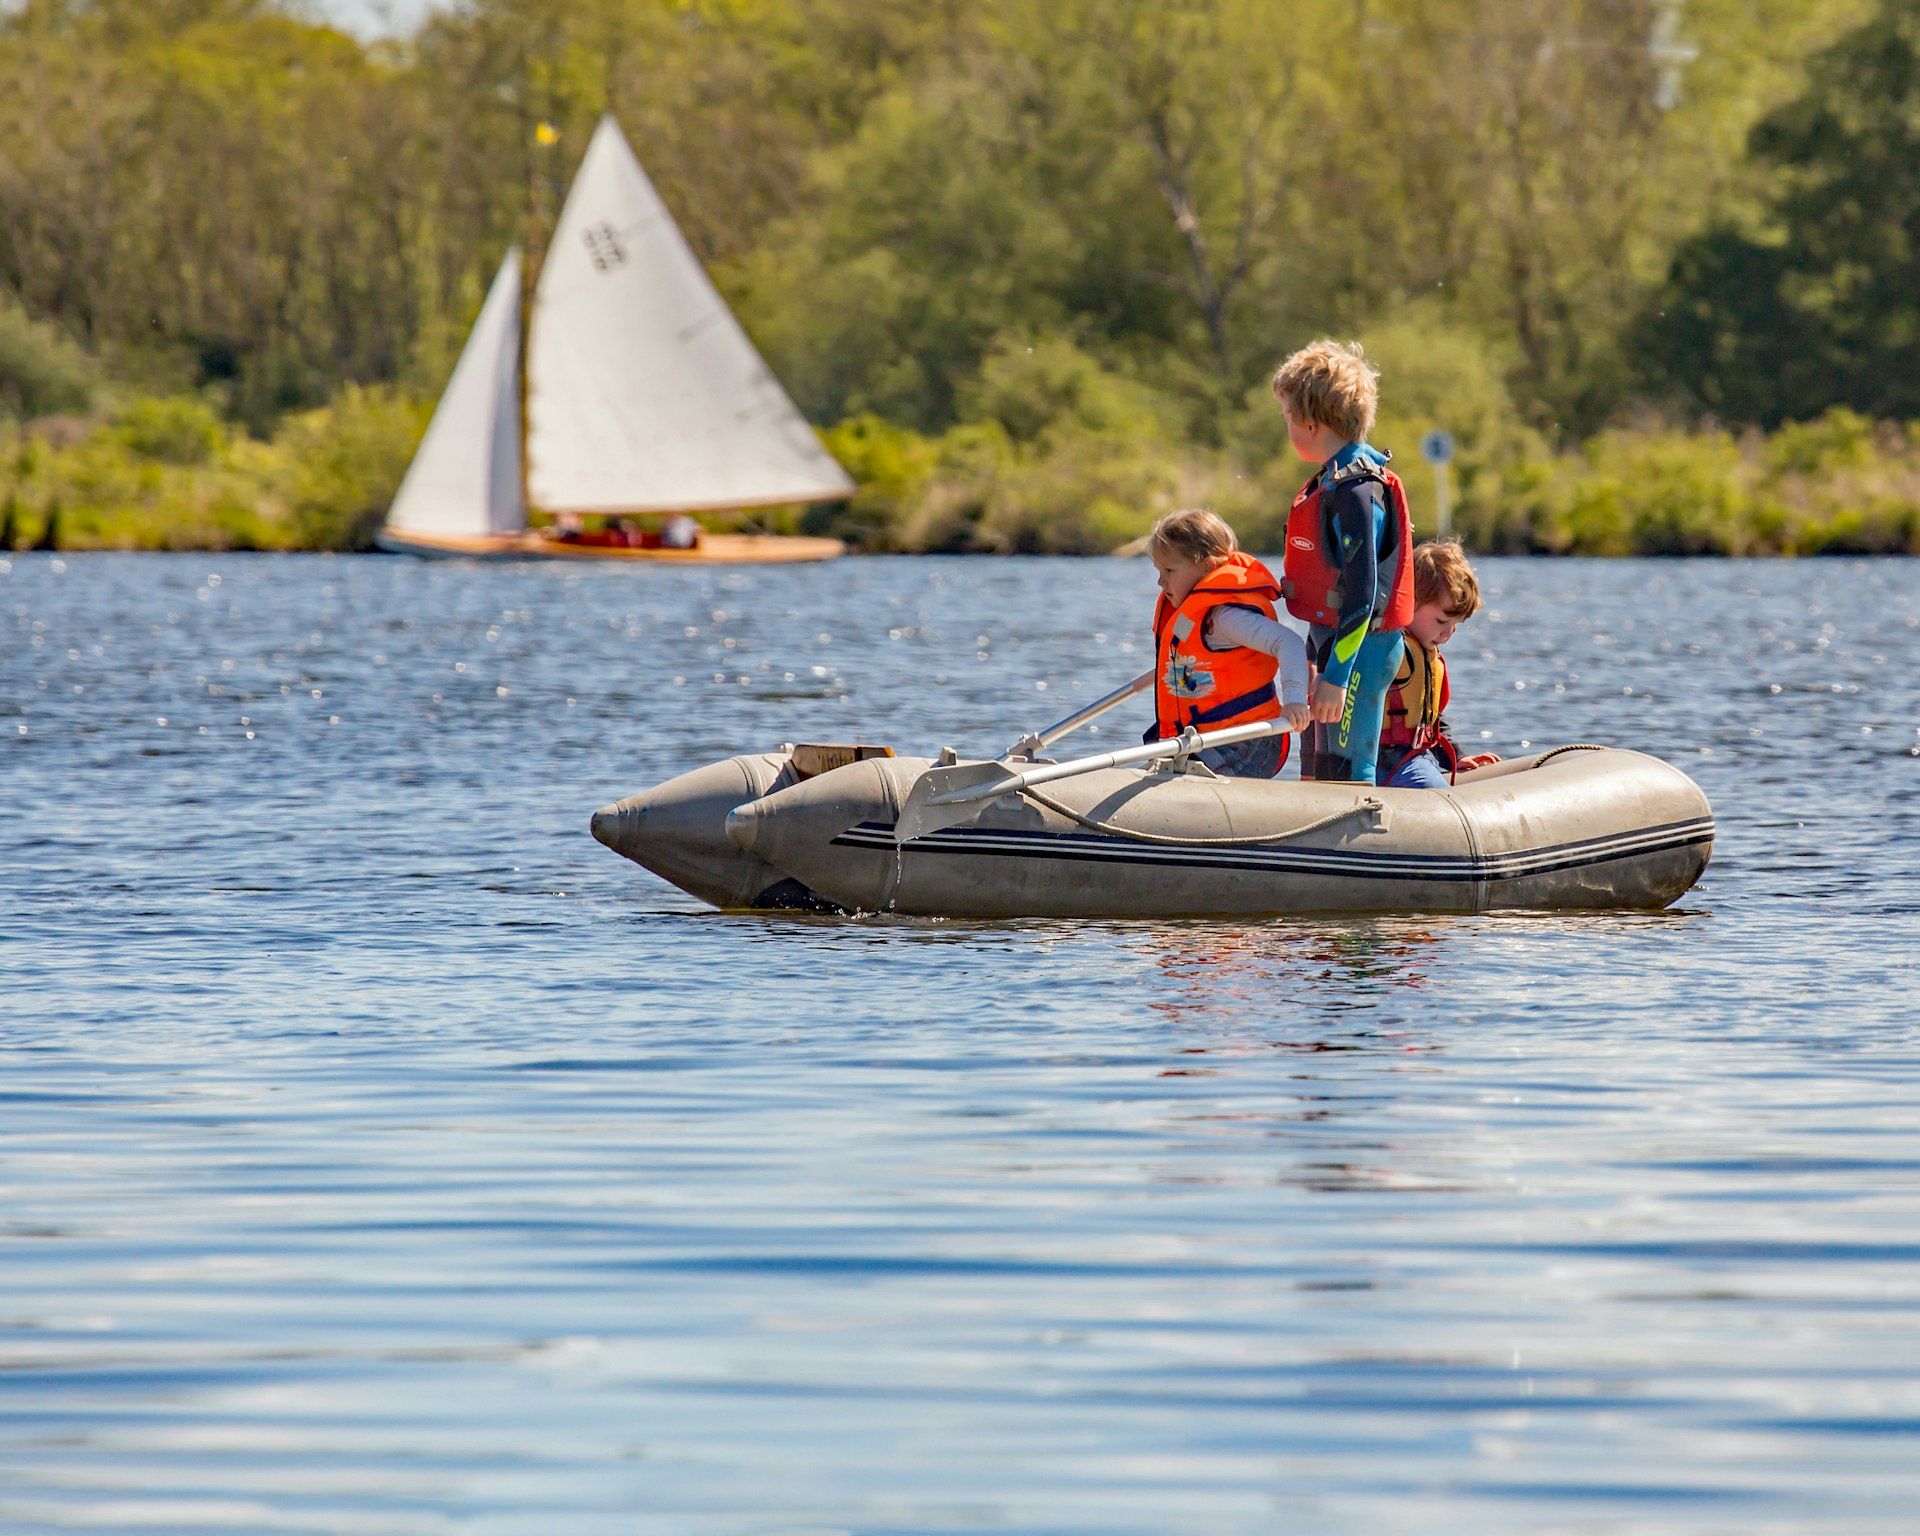 Three young children in a dinghy out on the water observe a fancy yacht sailing by